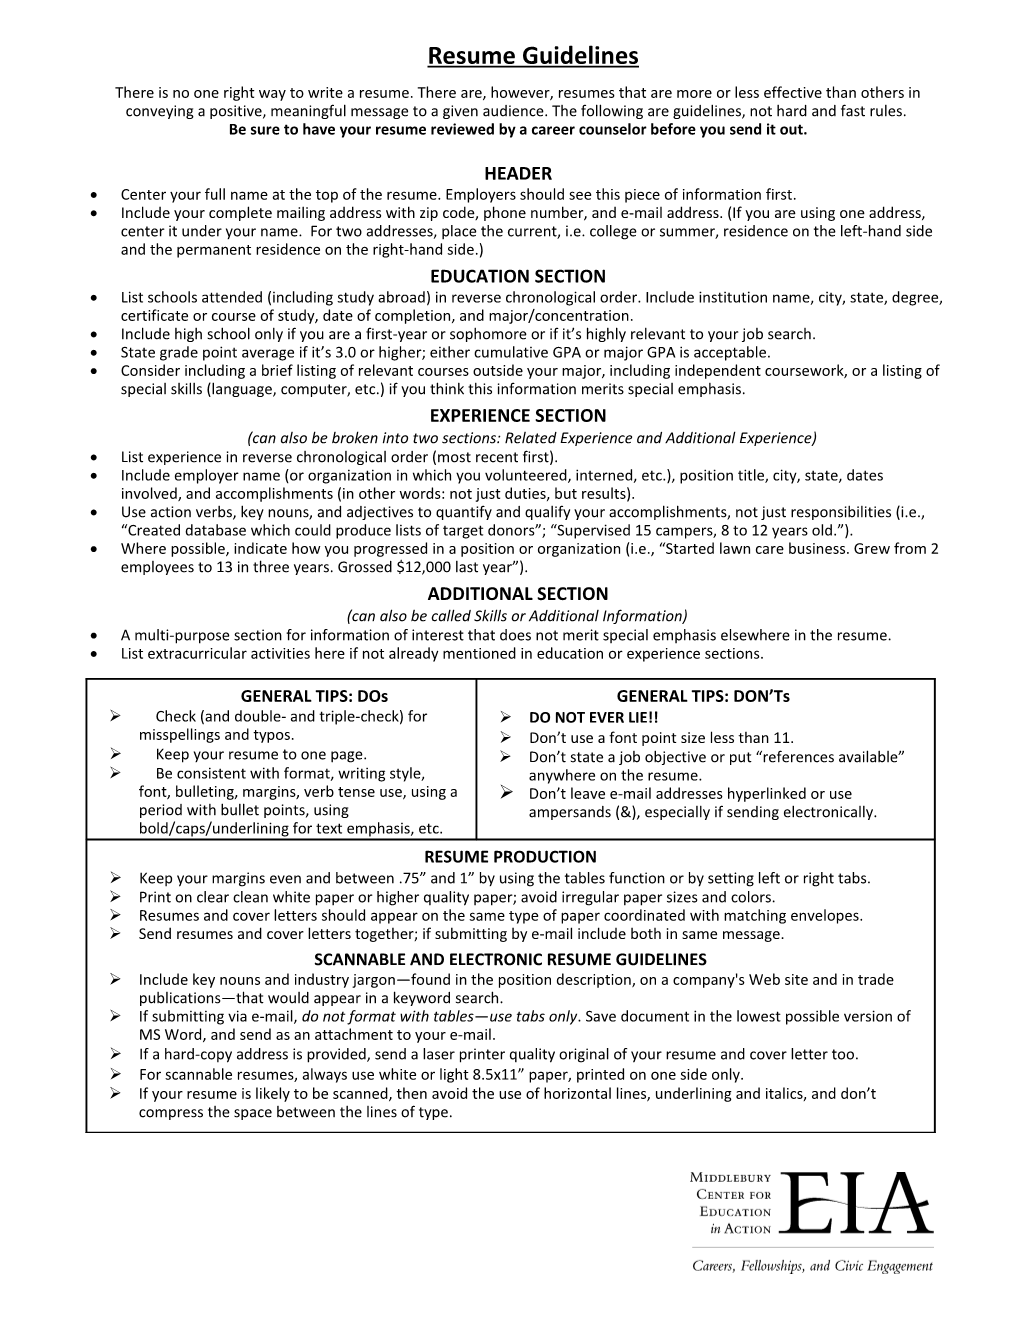 Resume Guidelines